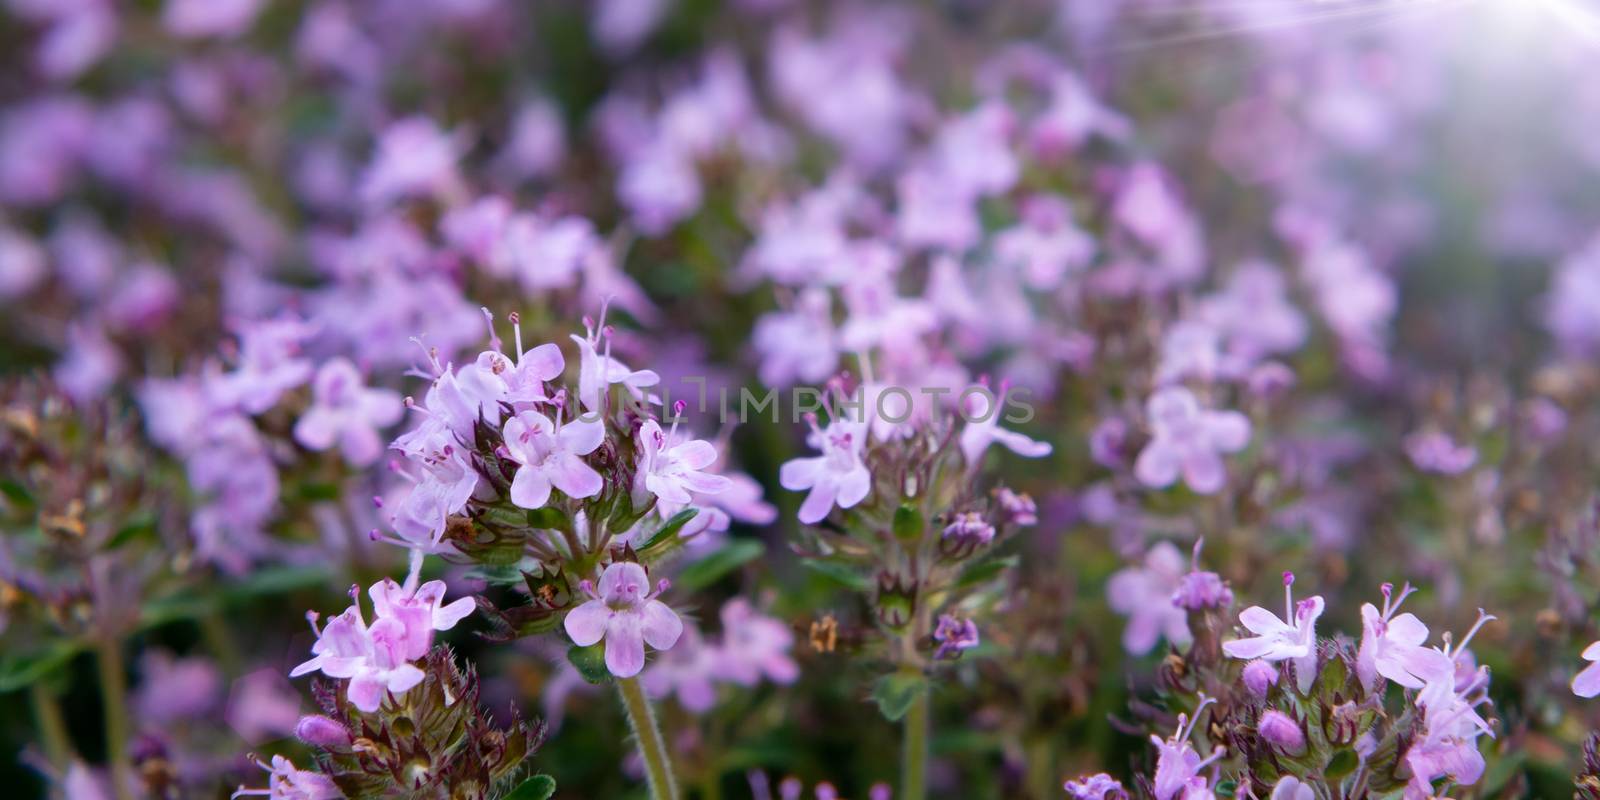 Groundcover blooming purple flowers thyme creeping on a bed in the garden, cose up, soft selective focus.